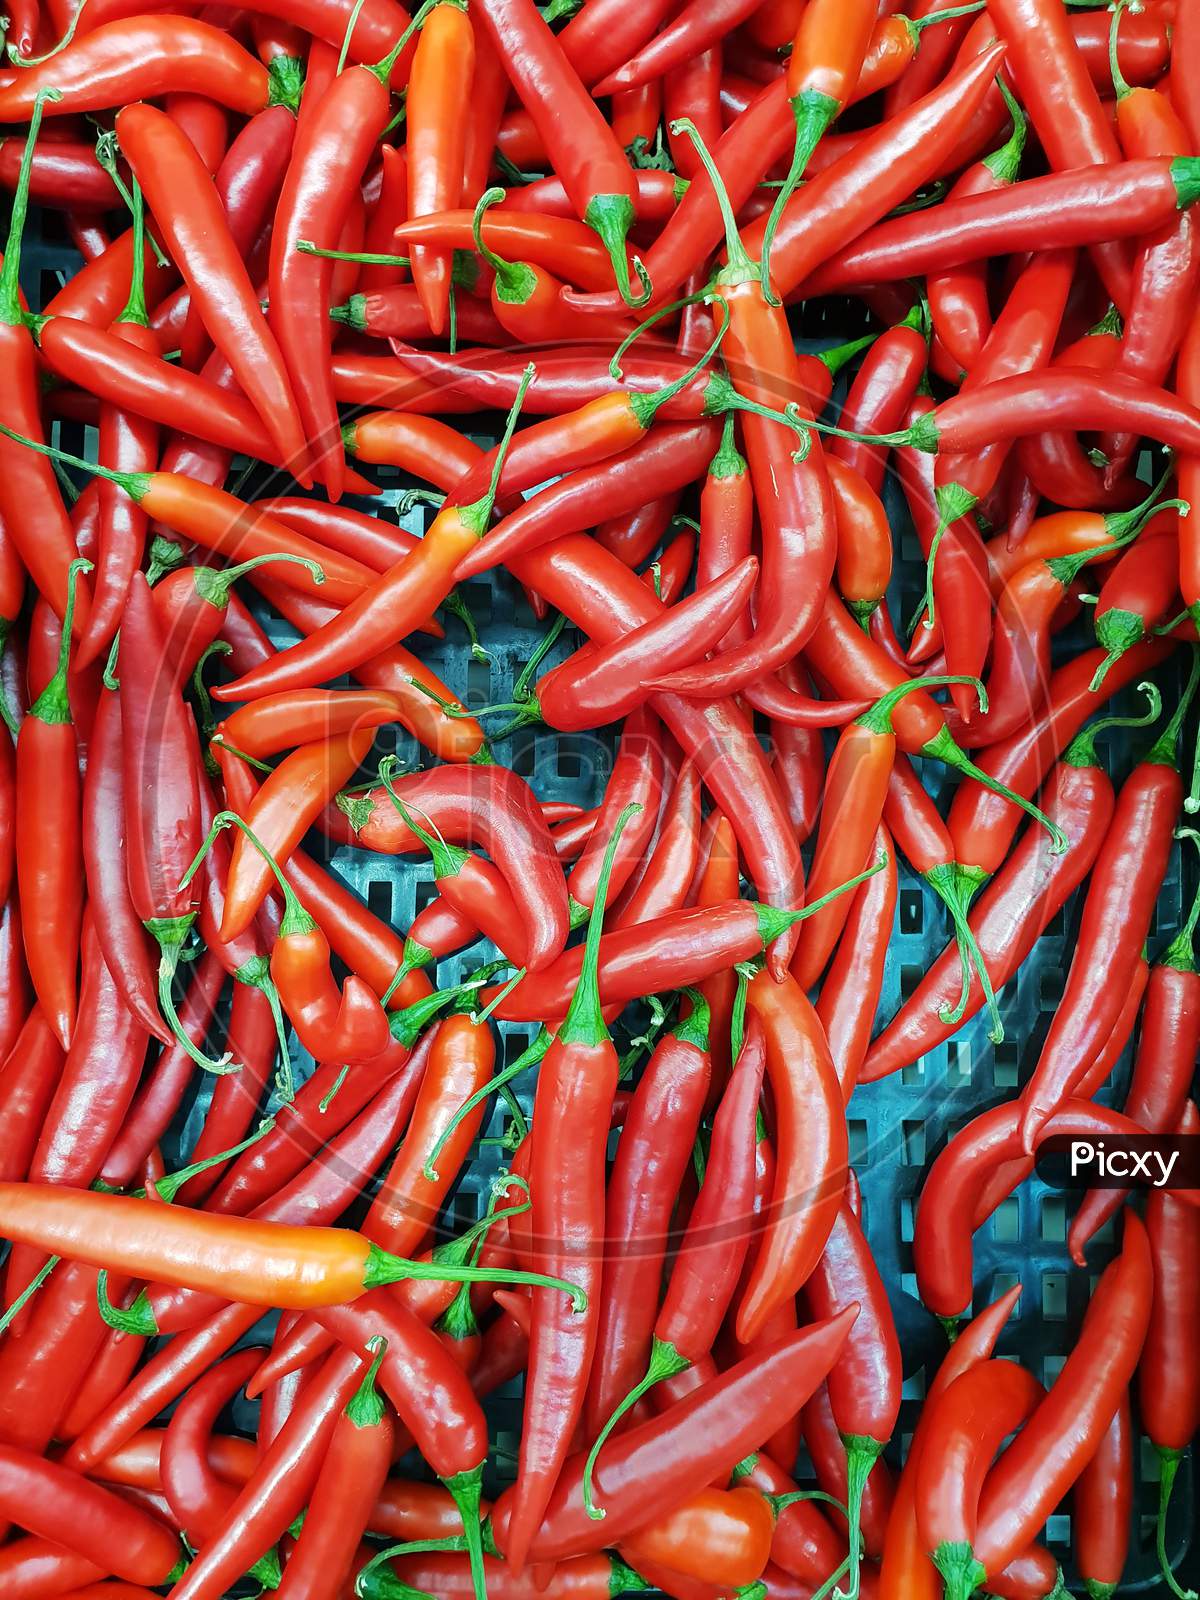 Red Hot Chili Peppers, Closeup View And For Sale In Market